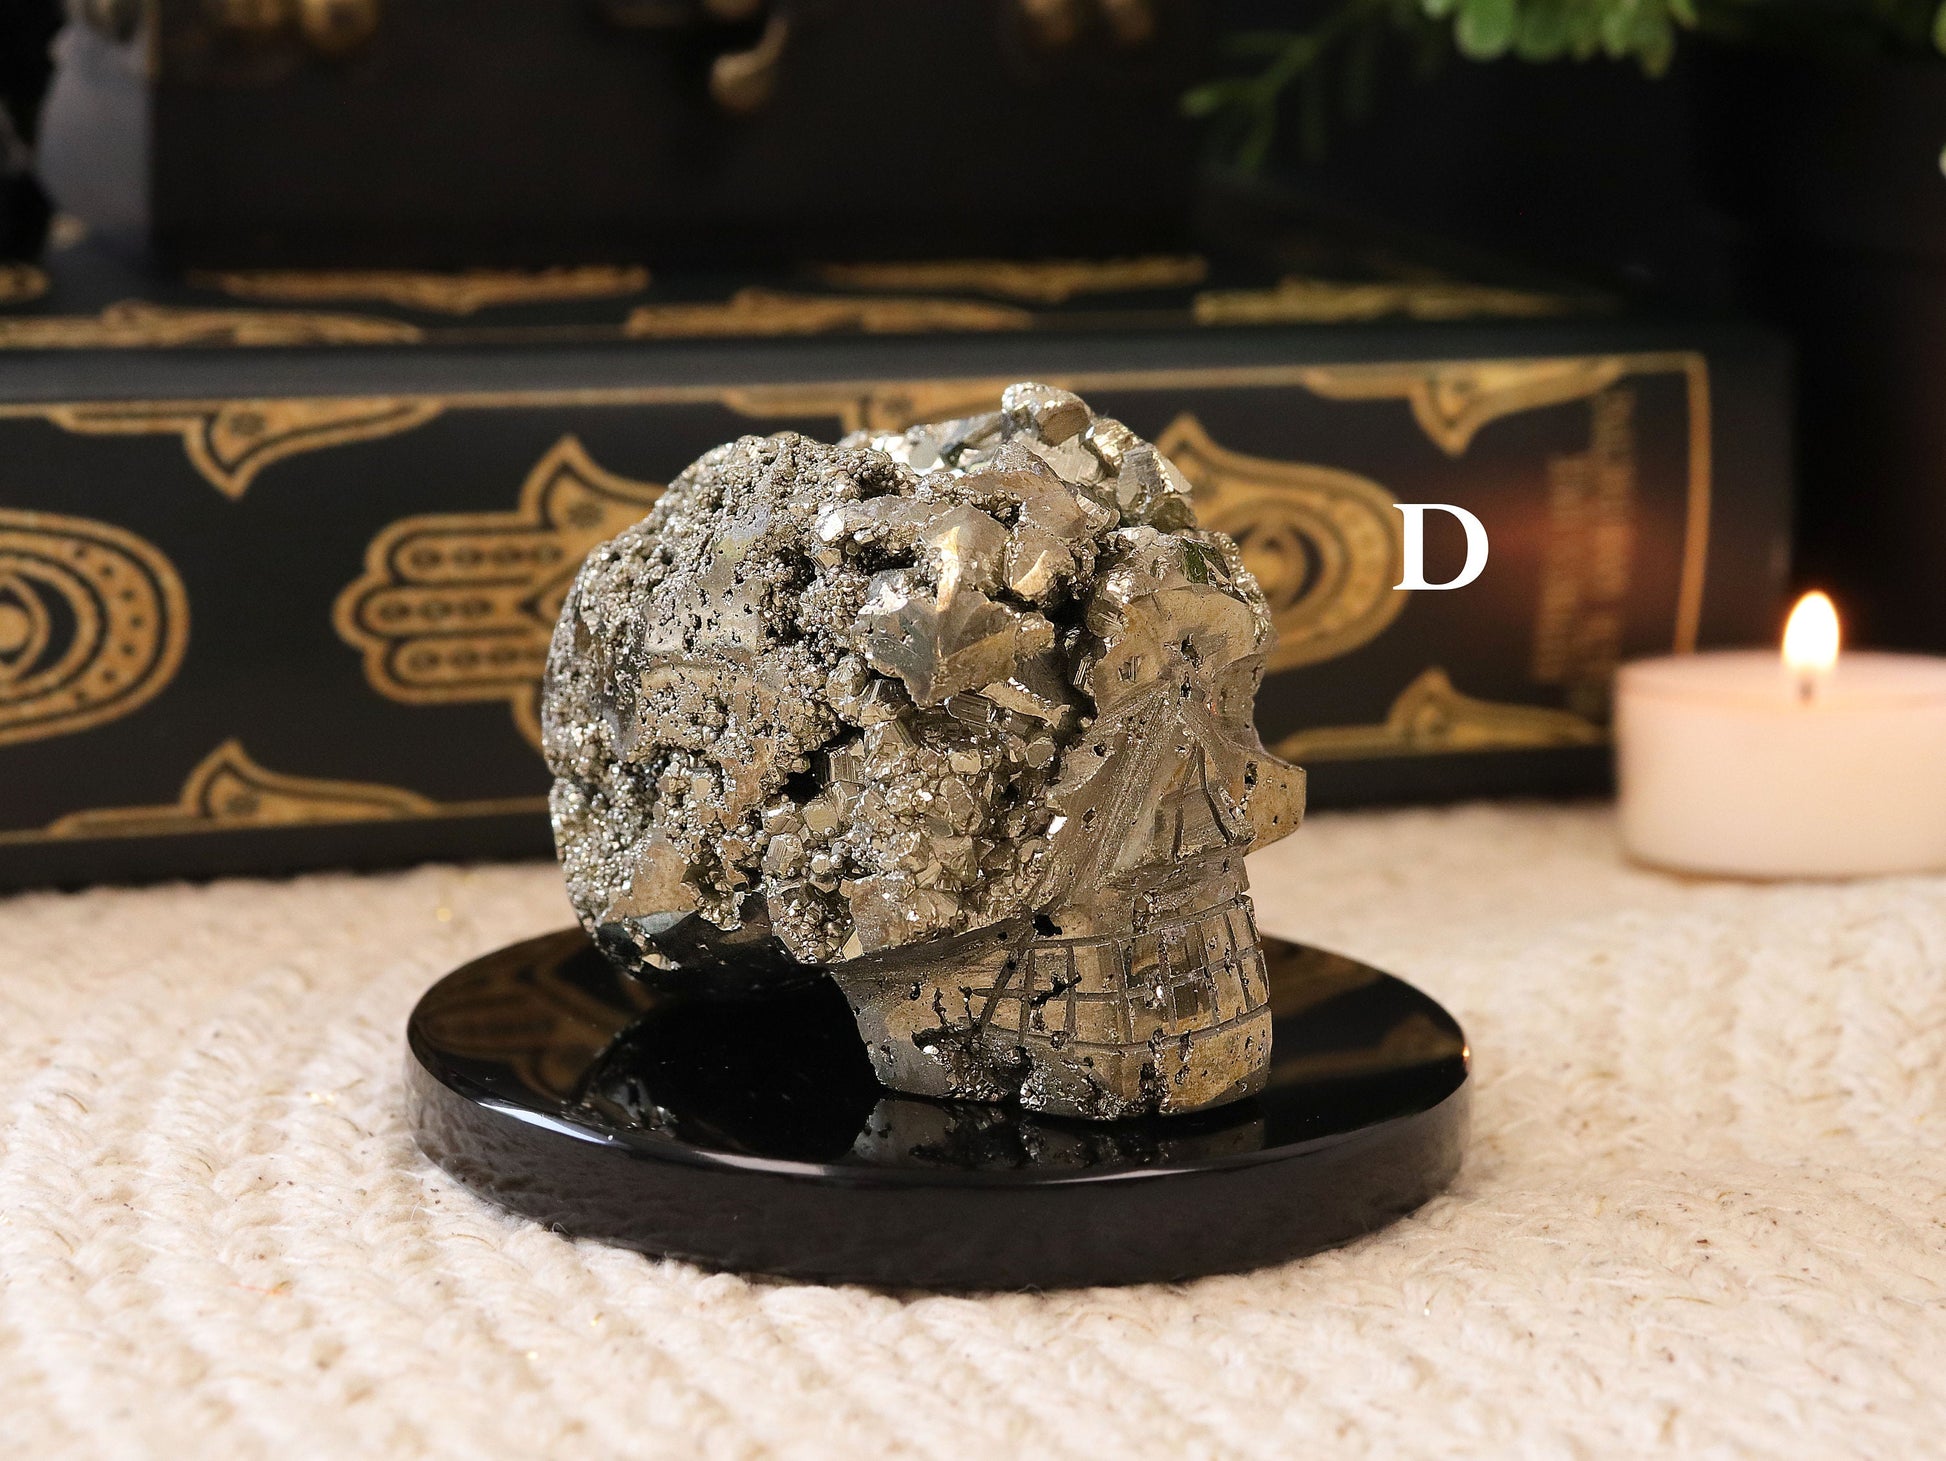 Pyrite Skull, Pyrite Cluster Shape, Gothic Aesthetic, Dark Home Decor, Ethically Sourced - PICK YOUR OWN